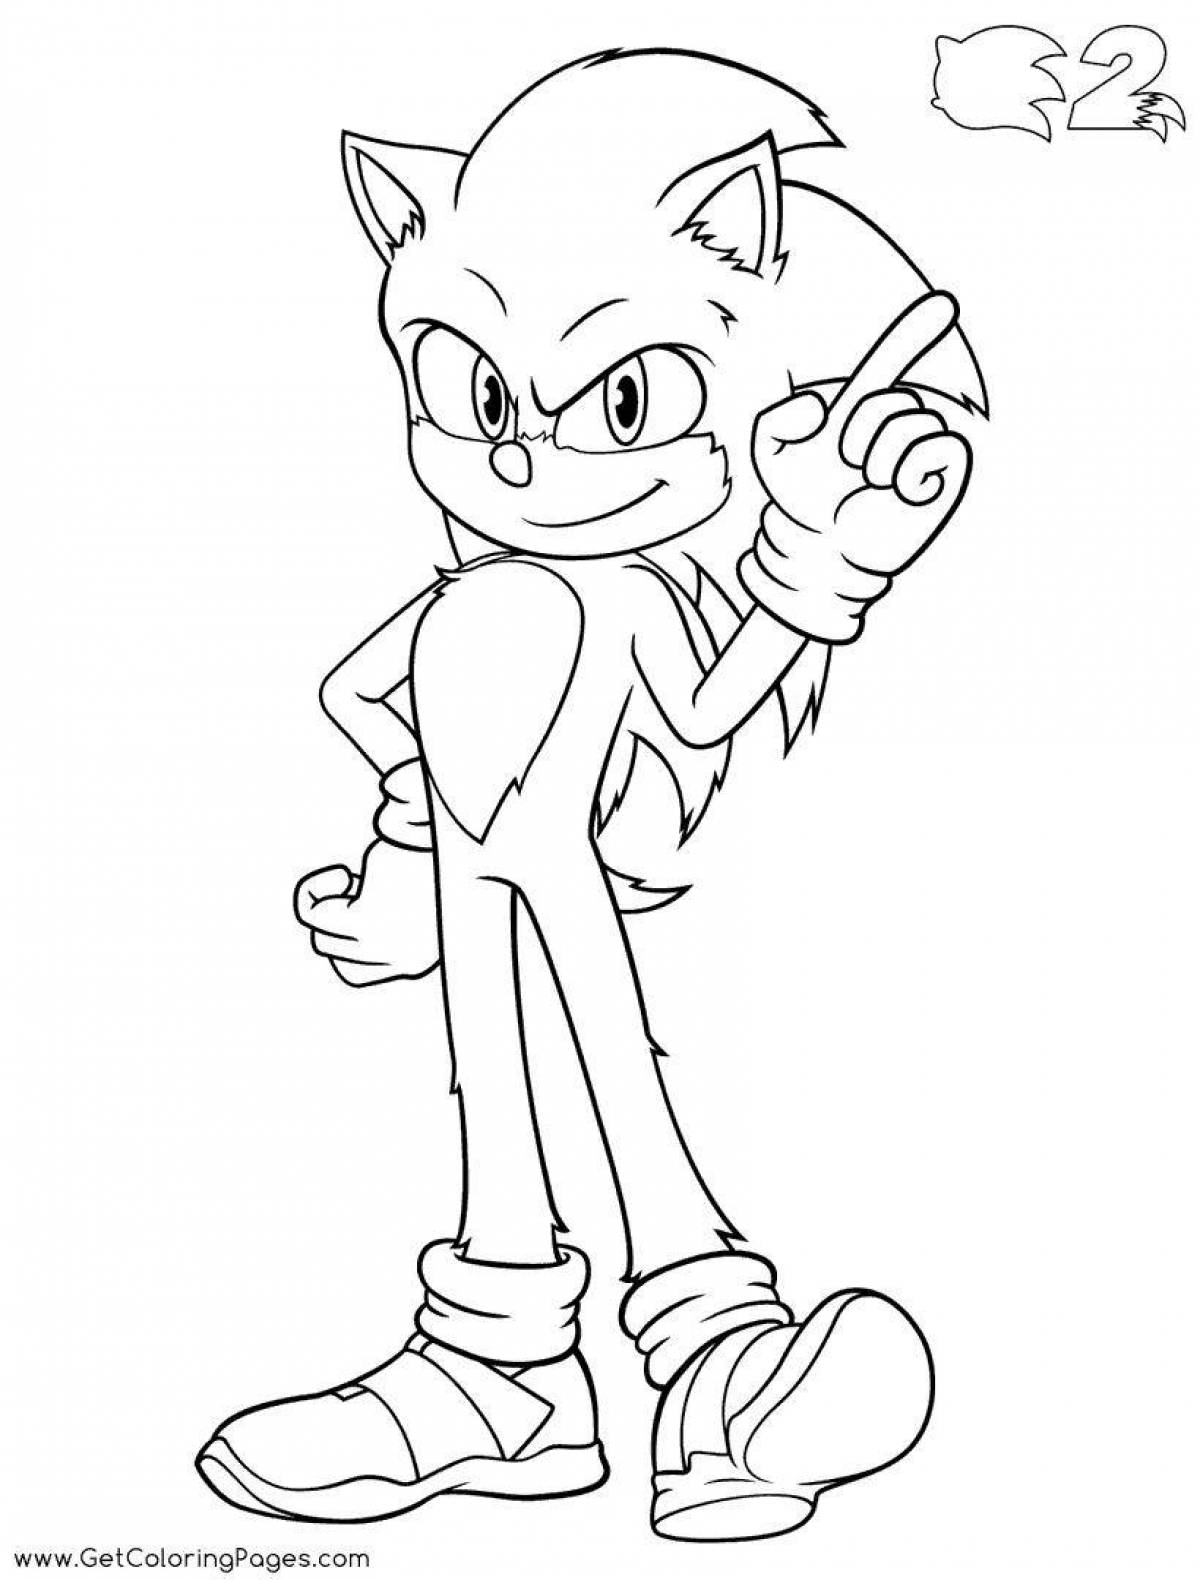 Sonic egzy glamor coloring book